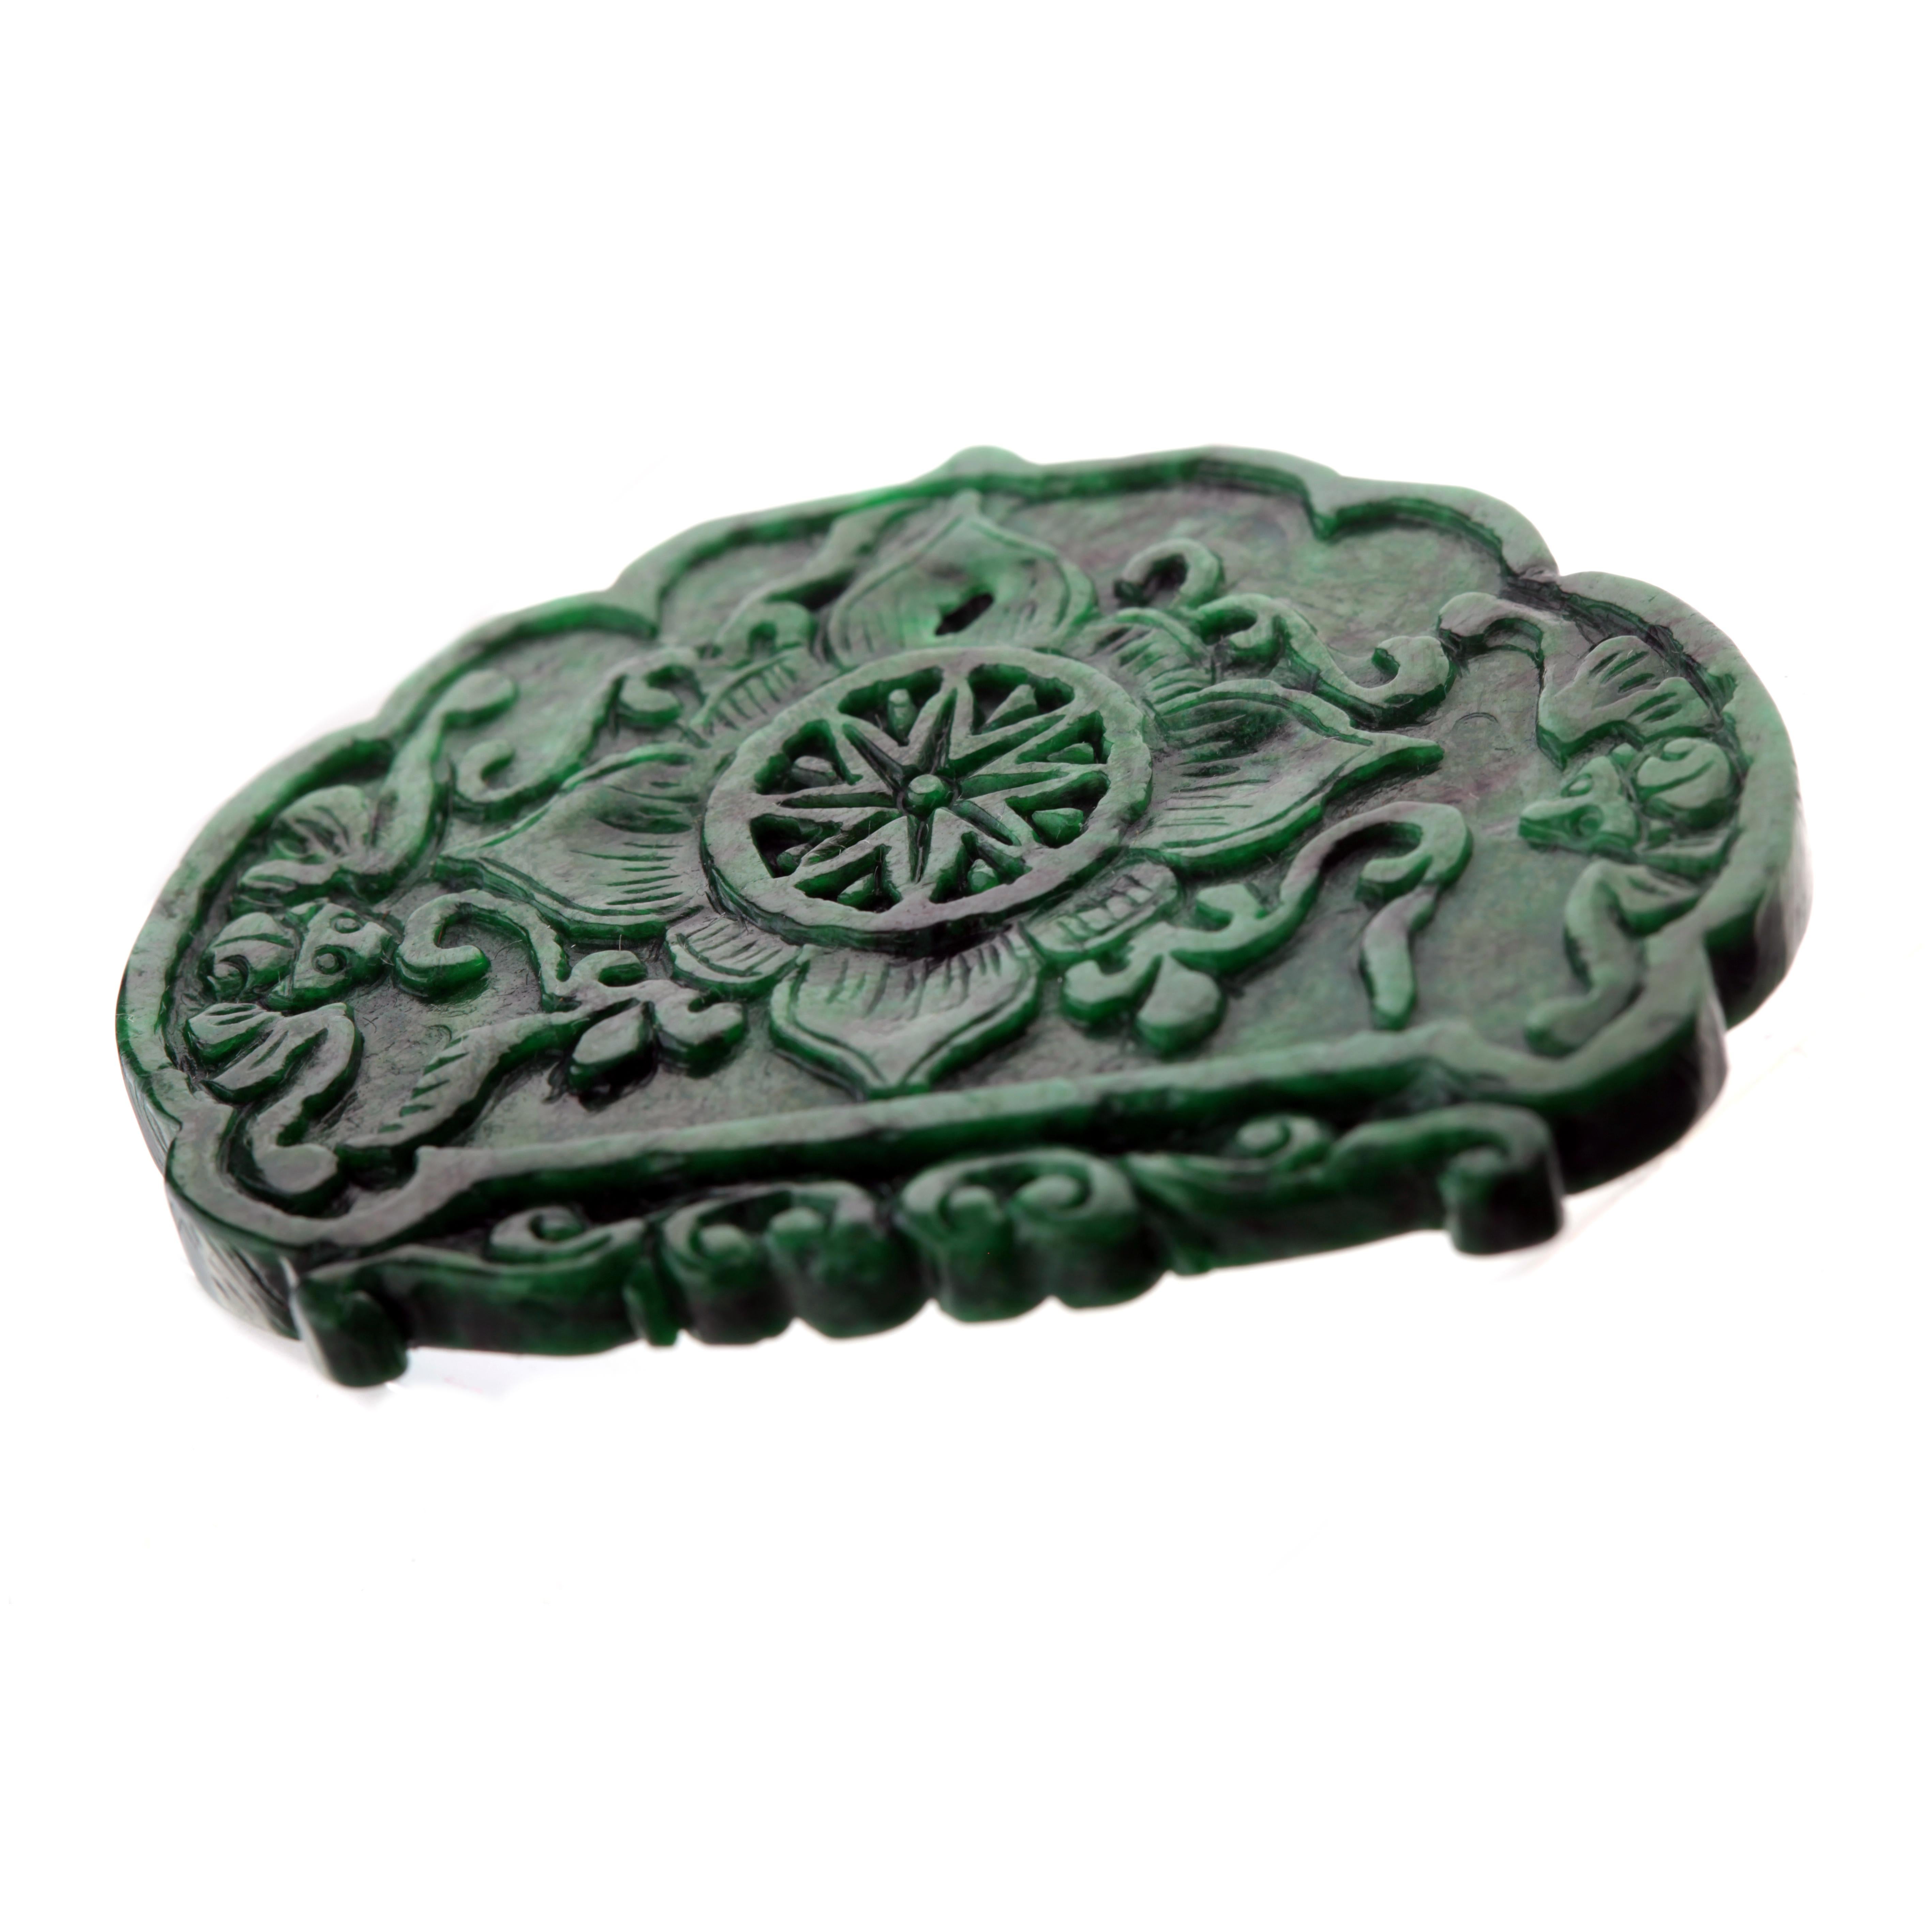 Important acquisition in the late 1970s in Hong Kong. This gentil gemstone offers a passionate colour in a precious way. Carved with extreme detail by fantastic local artists which transform raw stones into unique art works. Jade is one of the